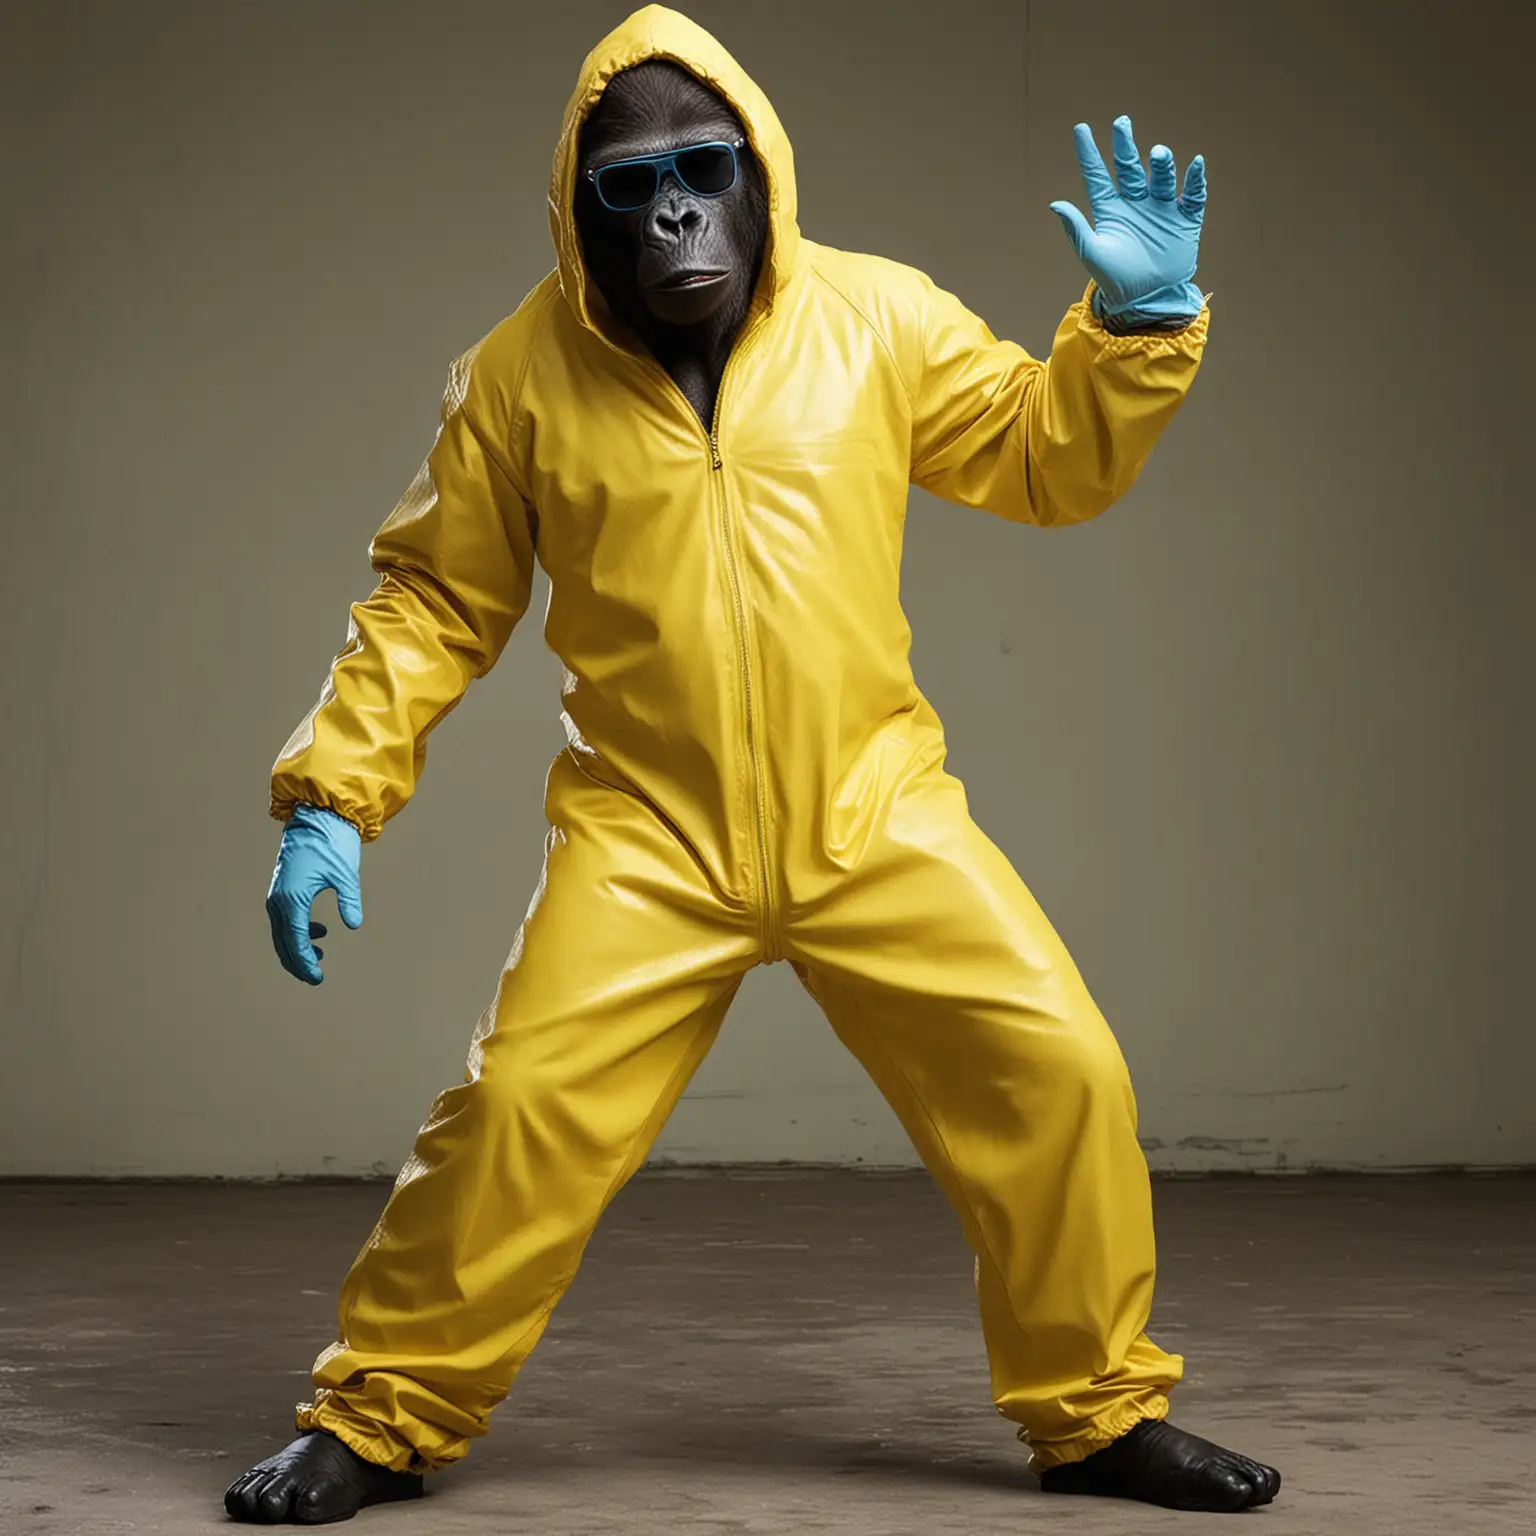 Gorilla dressed in a yellow jumpsuit like the one from the Breaking Bad series. He wears dark sunglasses with black frames. The hood covers his head and he wears light blue latex gloves. He looks confident and dancing